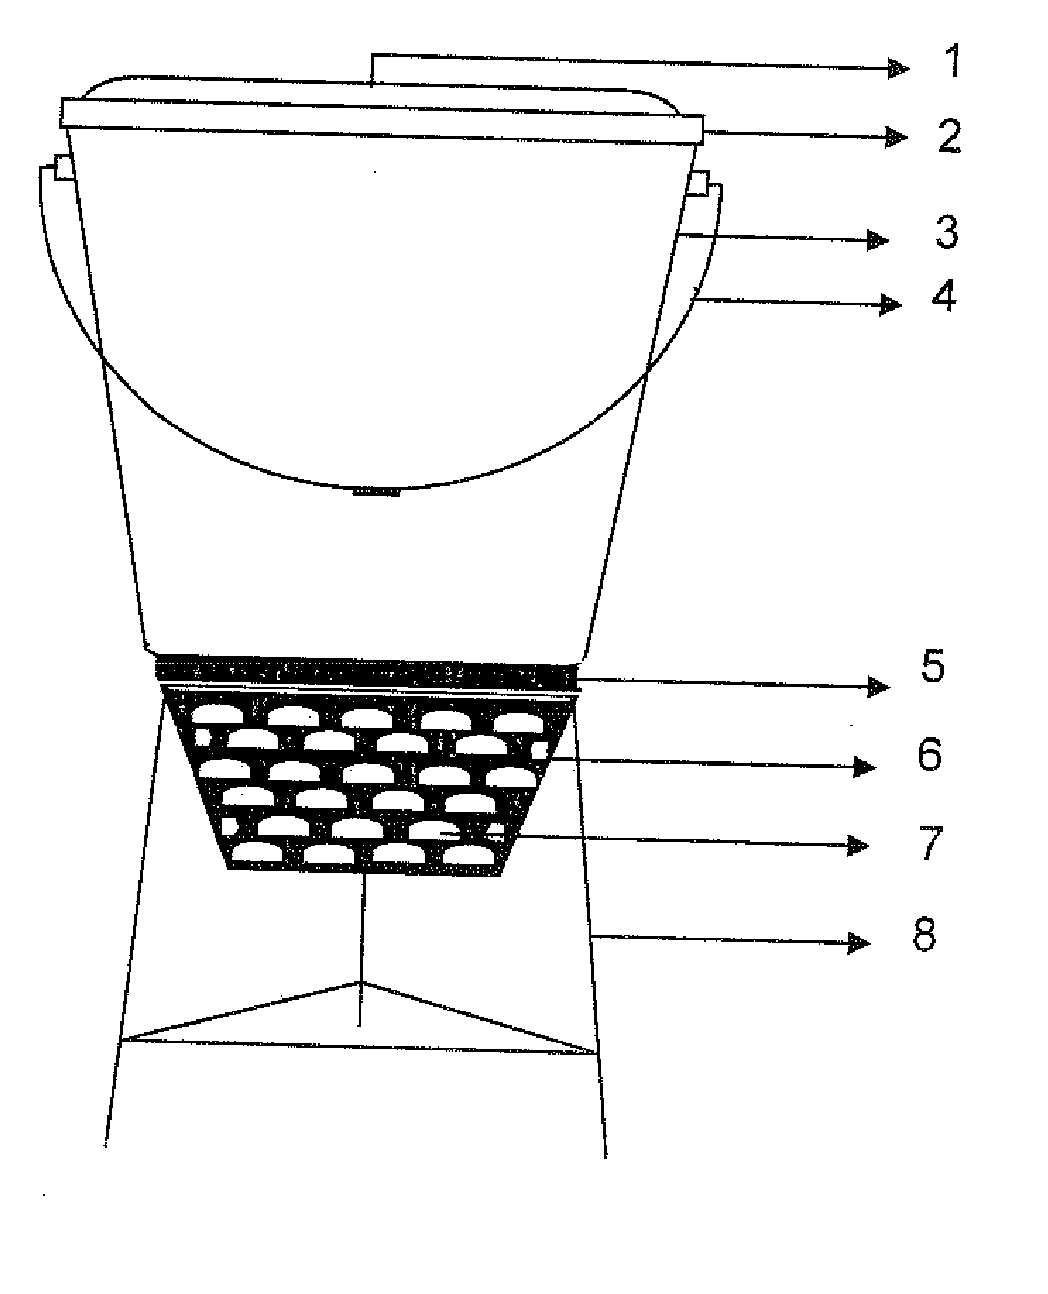 A Device for the Storage and Treatment of Biodegradable Wet Solid Waste